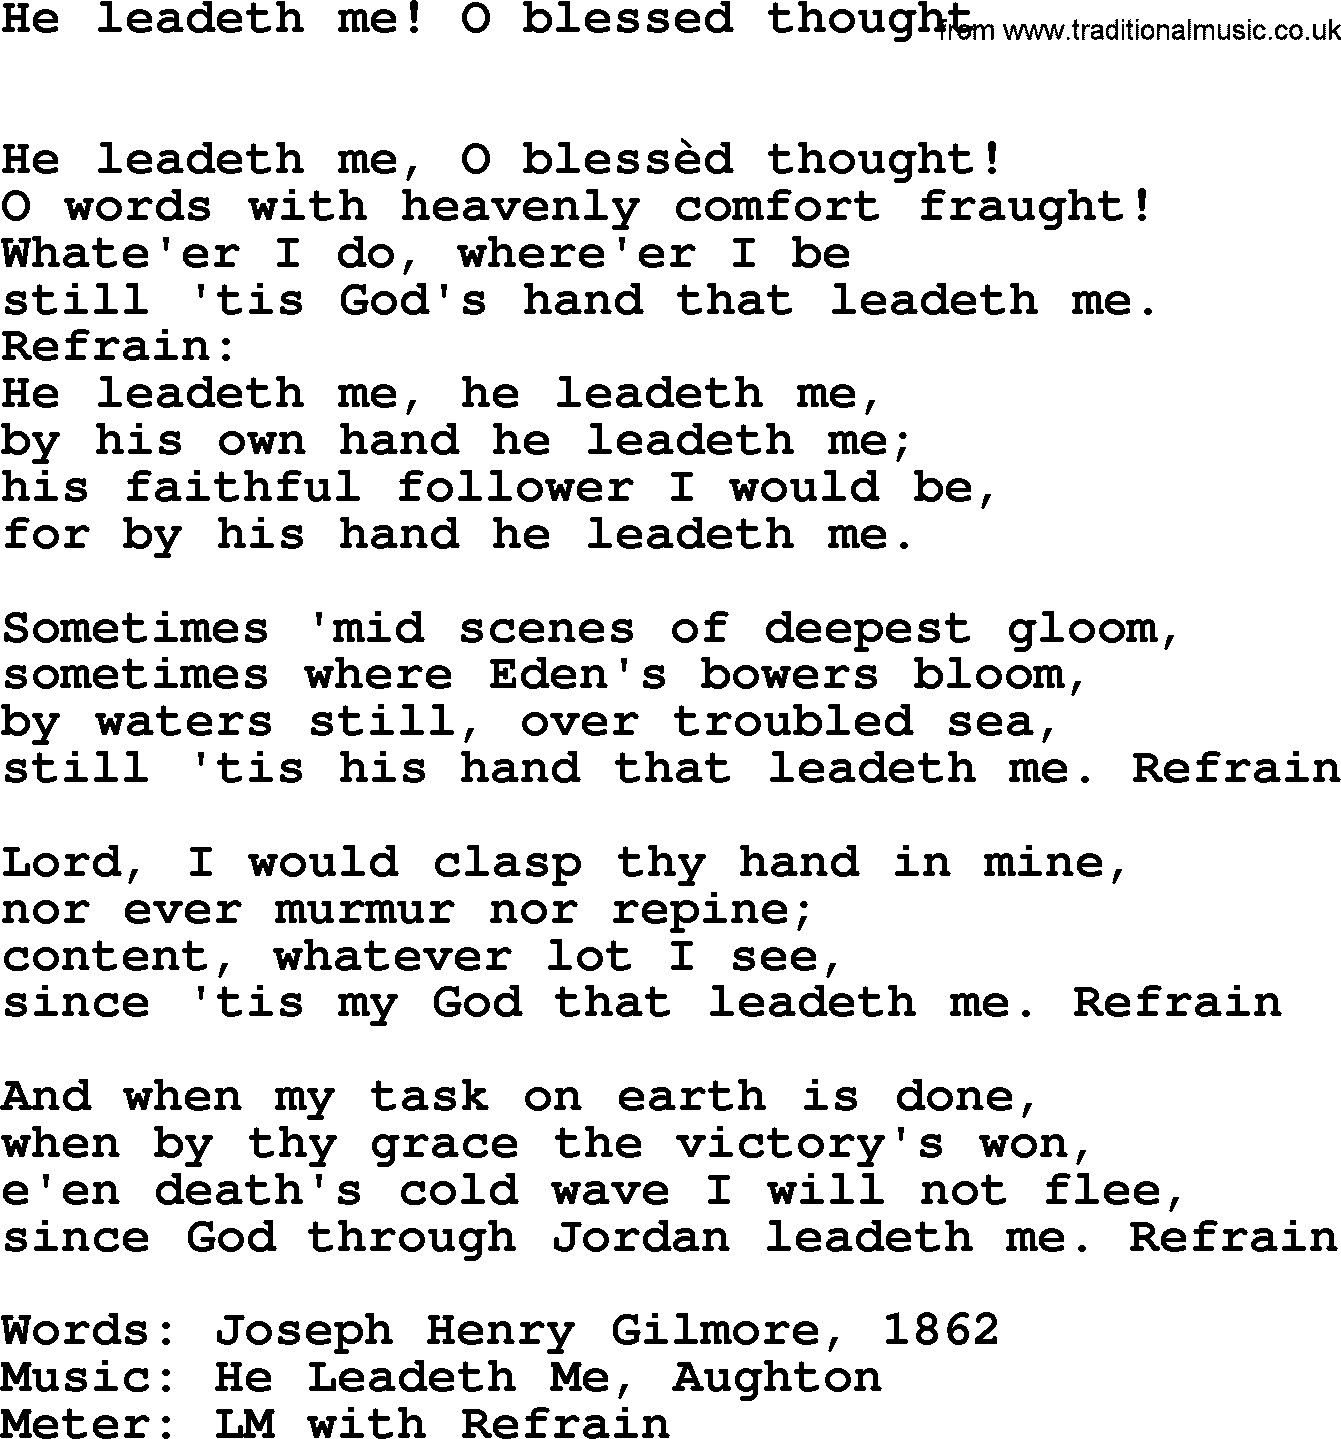 Book of Common Praise Hymn: He Leadeth Me! O Blessed Thought.txt lyrics with midi music